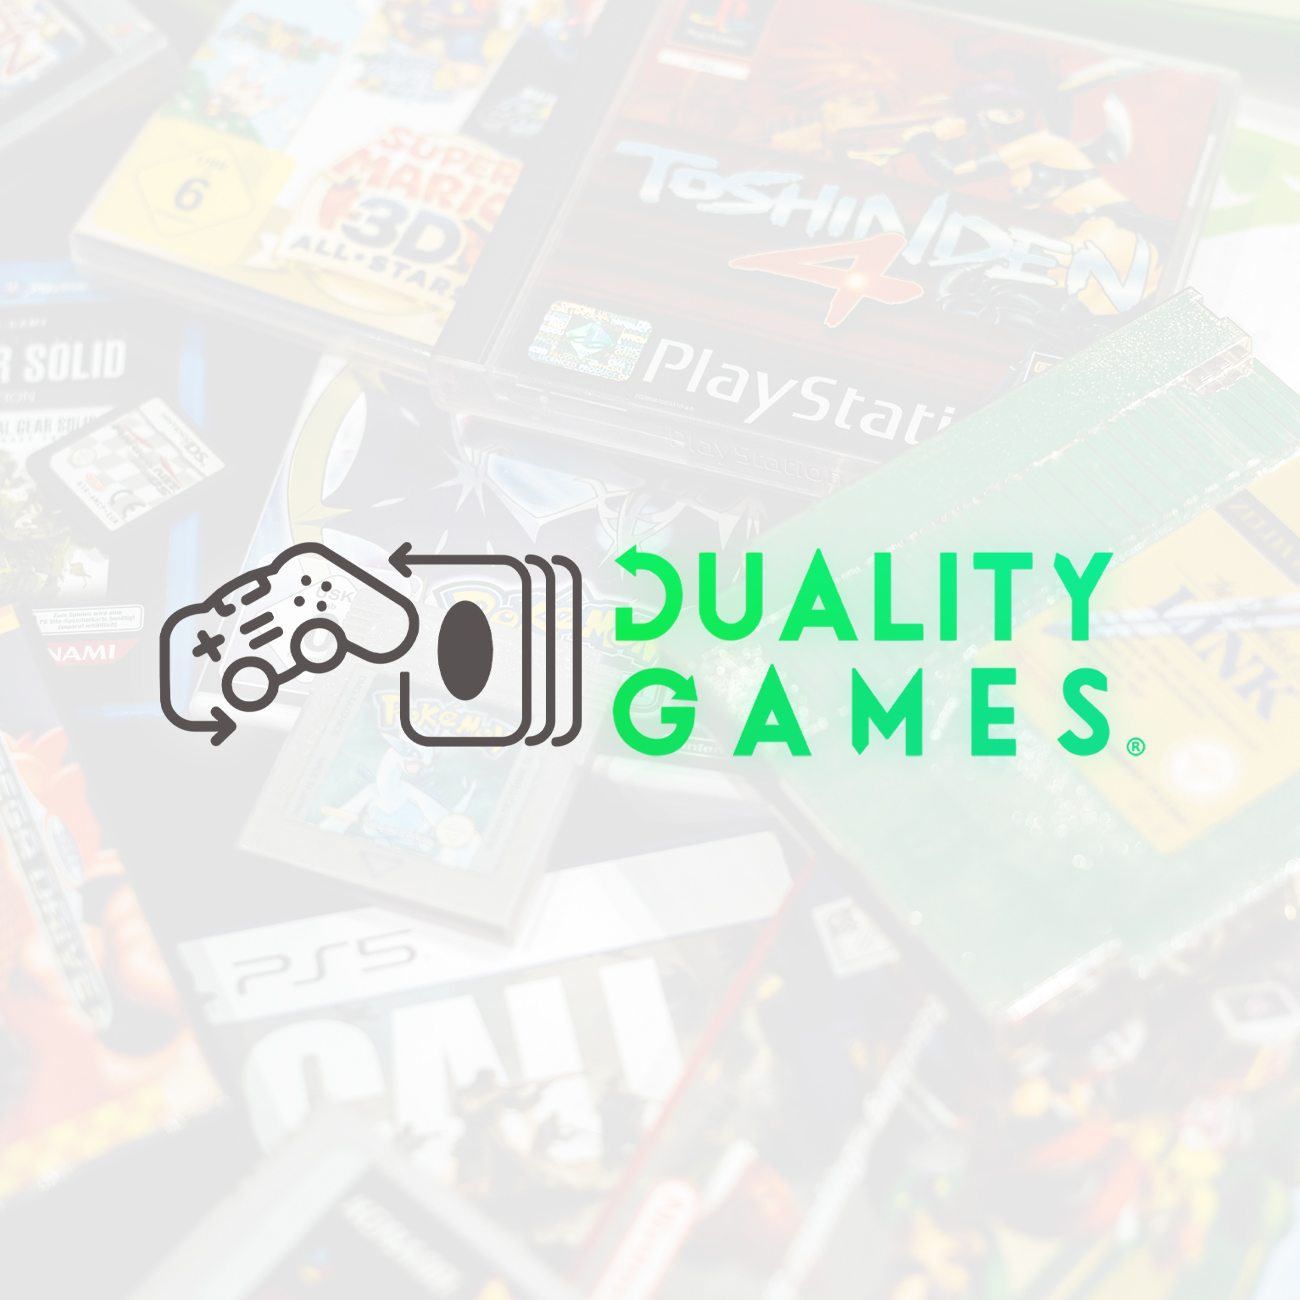 Referenz Onlineshop Duality Games